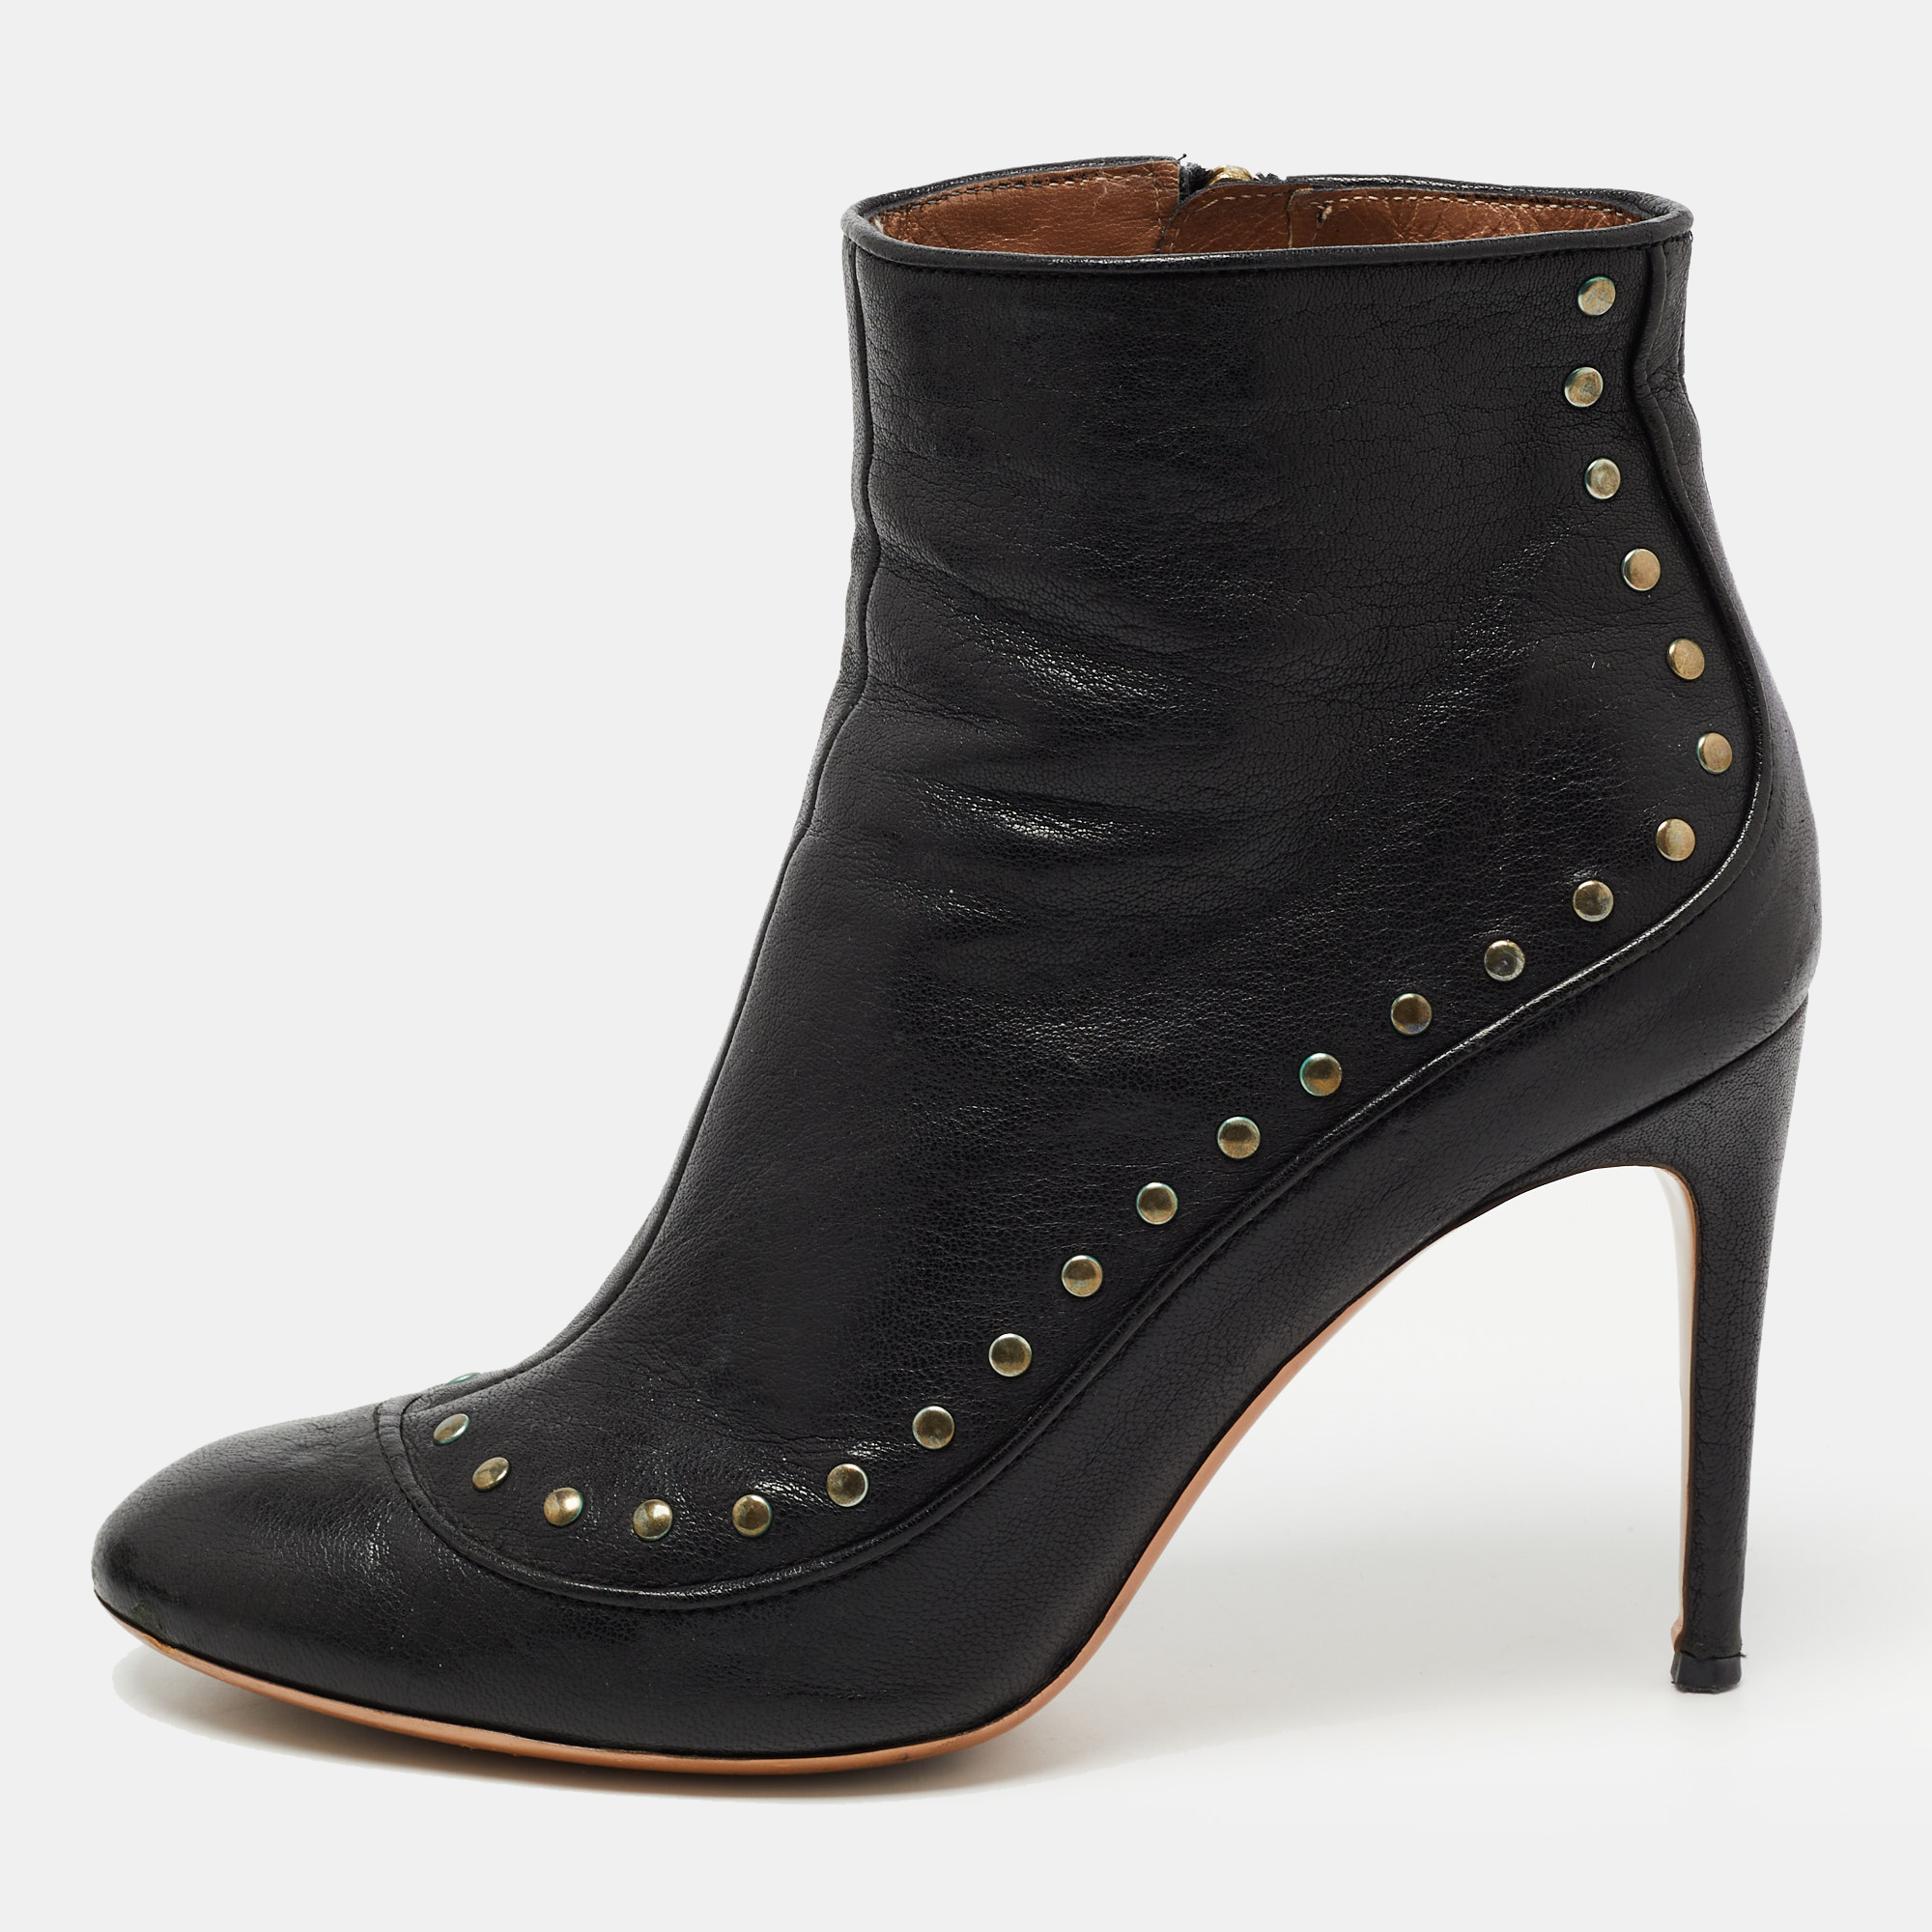 

Roberto Cavalli Black Leather Studded Ankle Booties Size